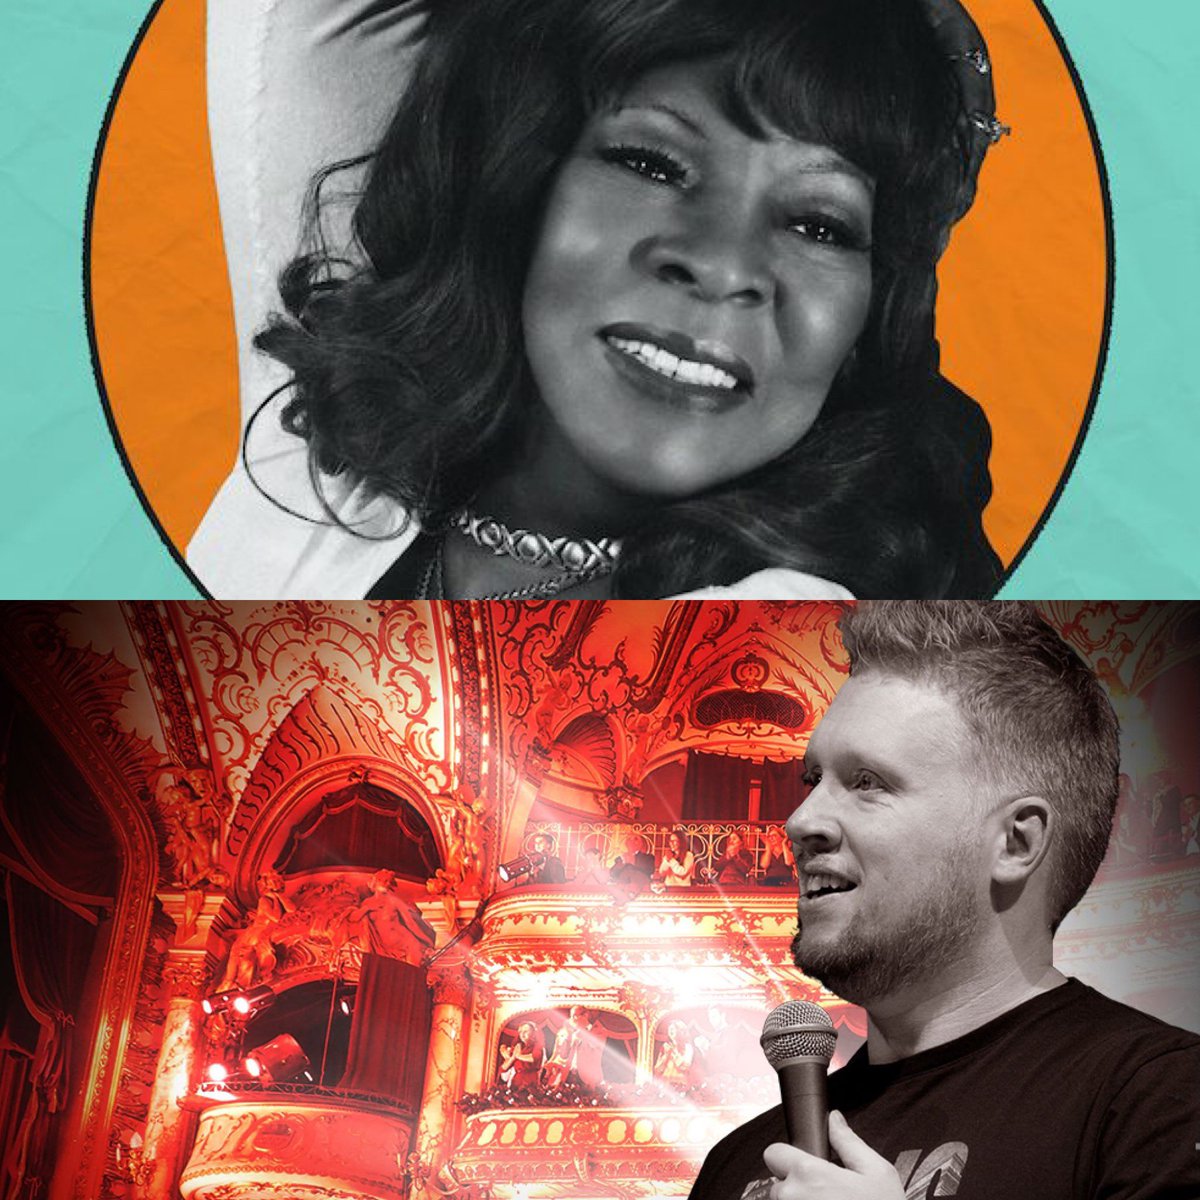 Seeing Paul Smith or Martha Reeves & The Vandellas Saturday night? Get 20% off your ENTIRE bill when you dine with us before the shows - just show your ticket when asking for your bill to get 20% off 😄😄 @SugarmillStoke @RegandVic